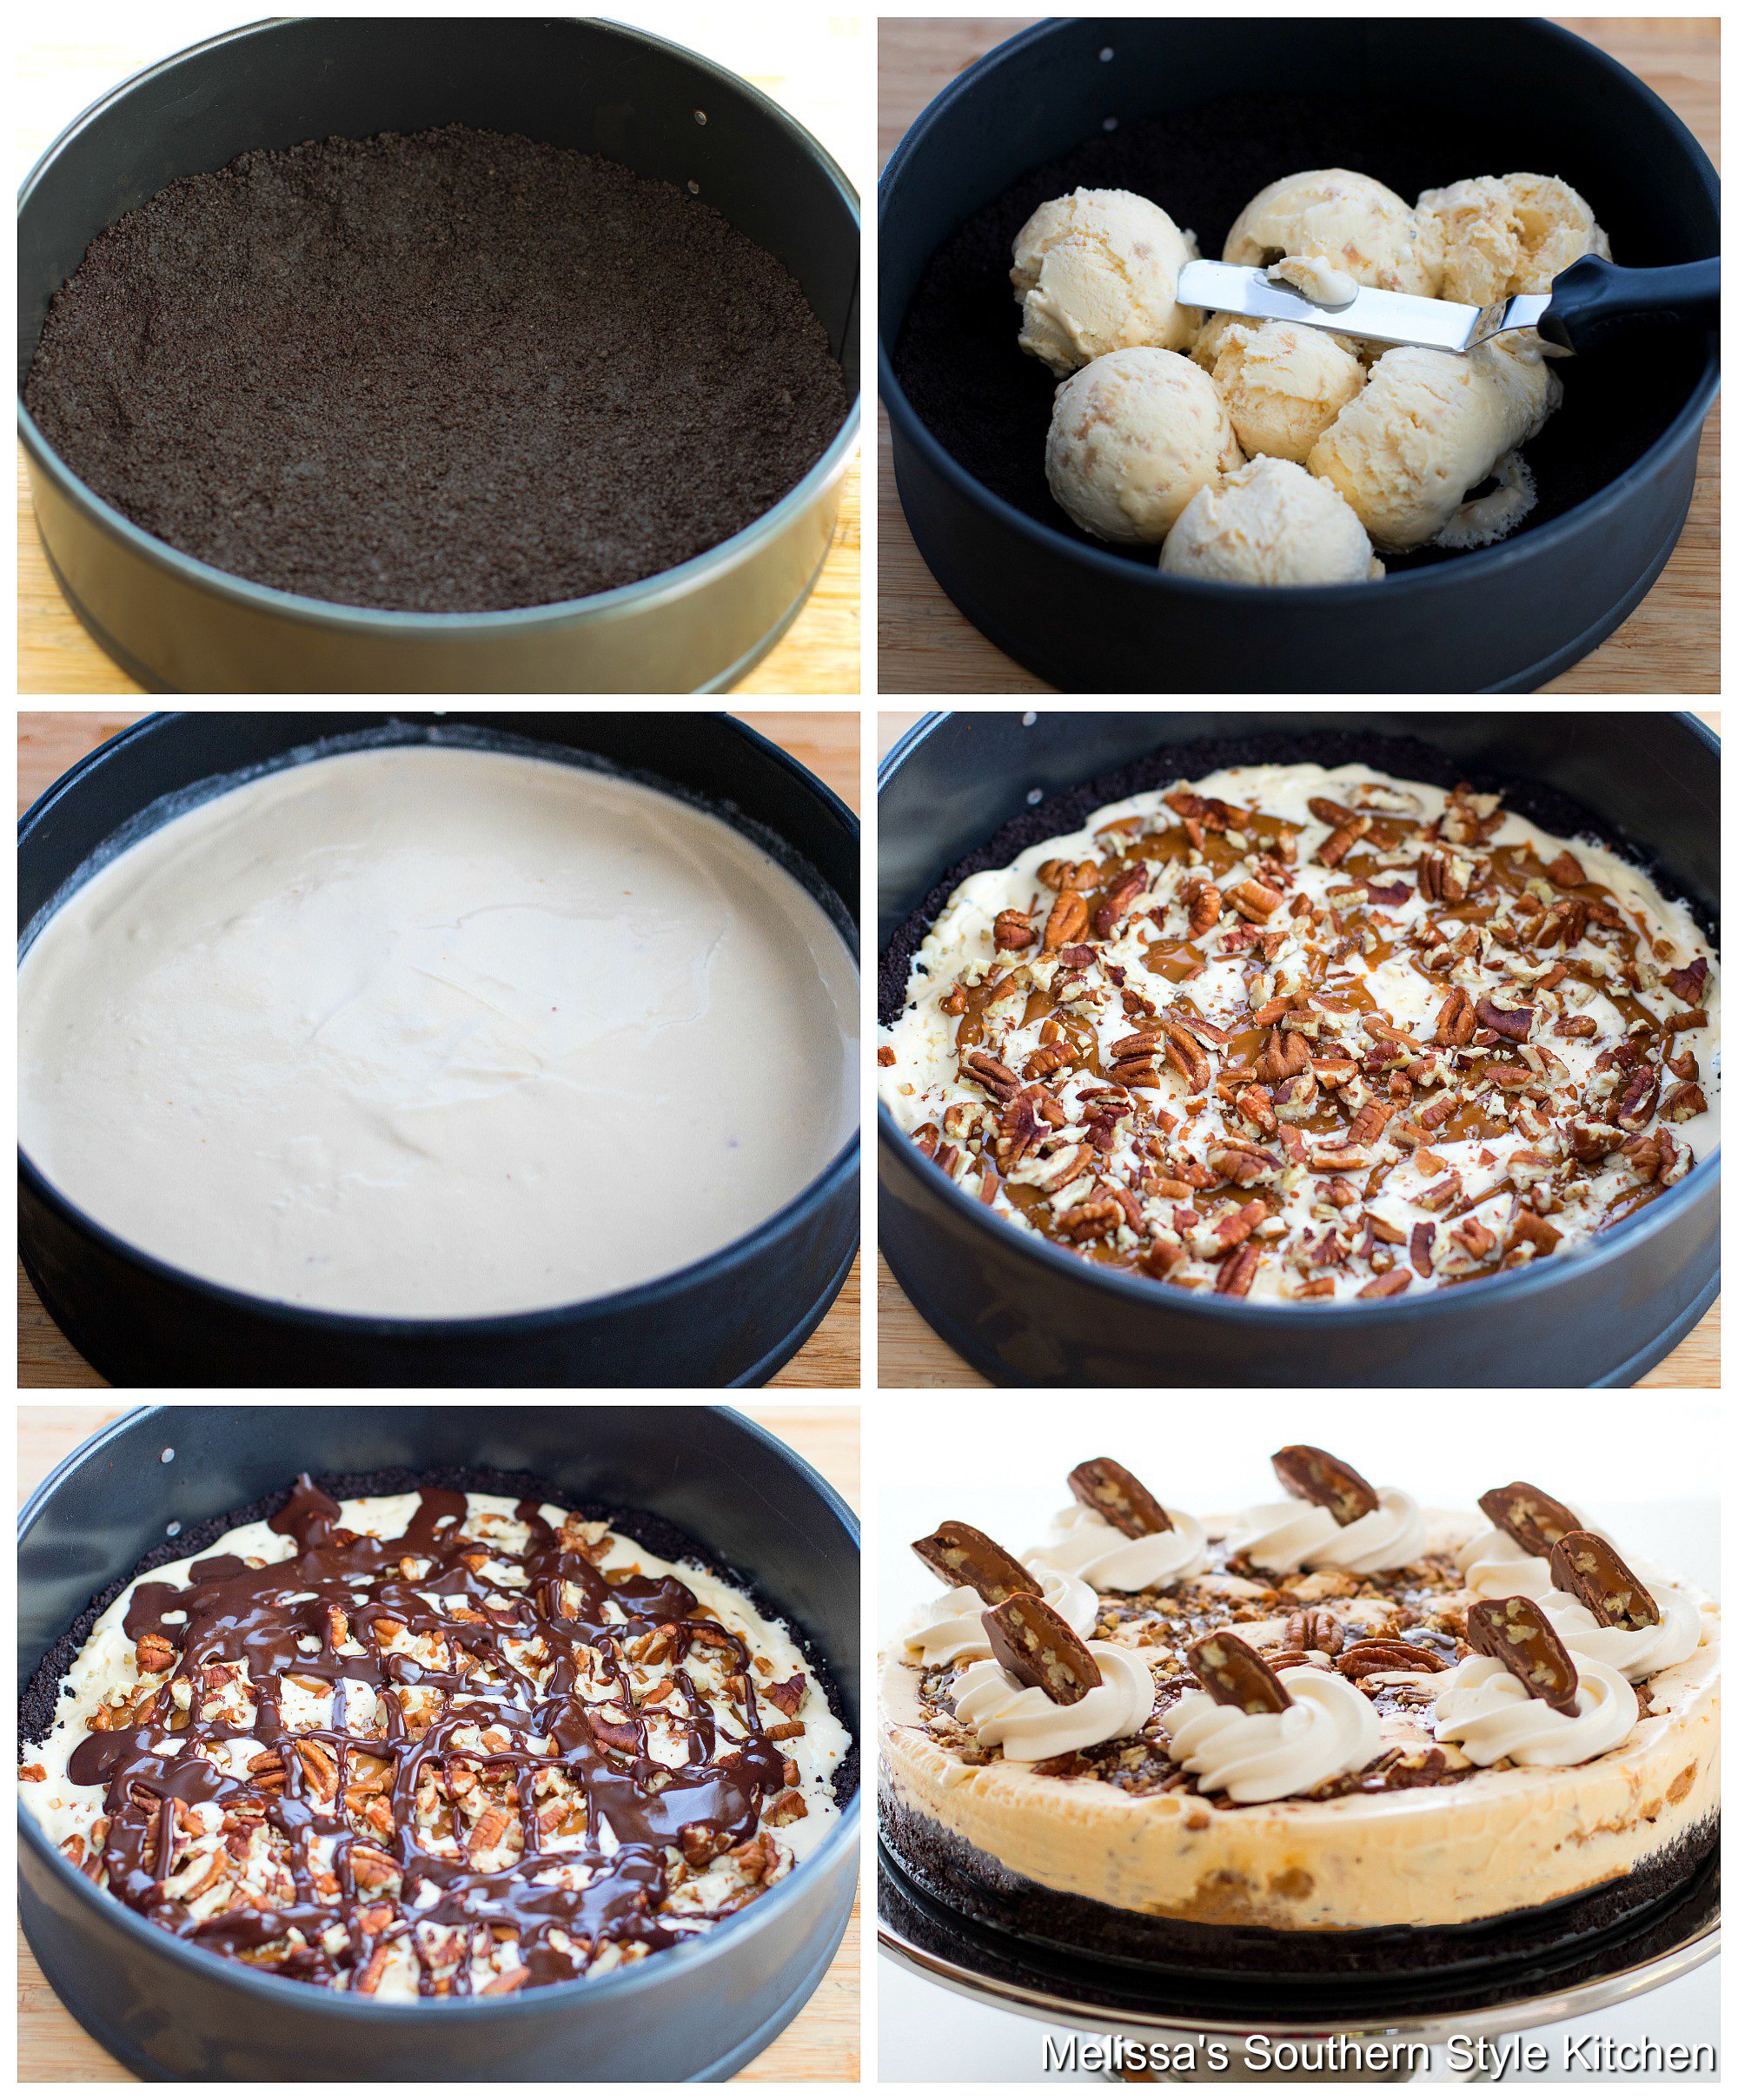 Step-by-step preparation images and ingredients for ice cream pie